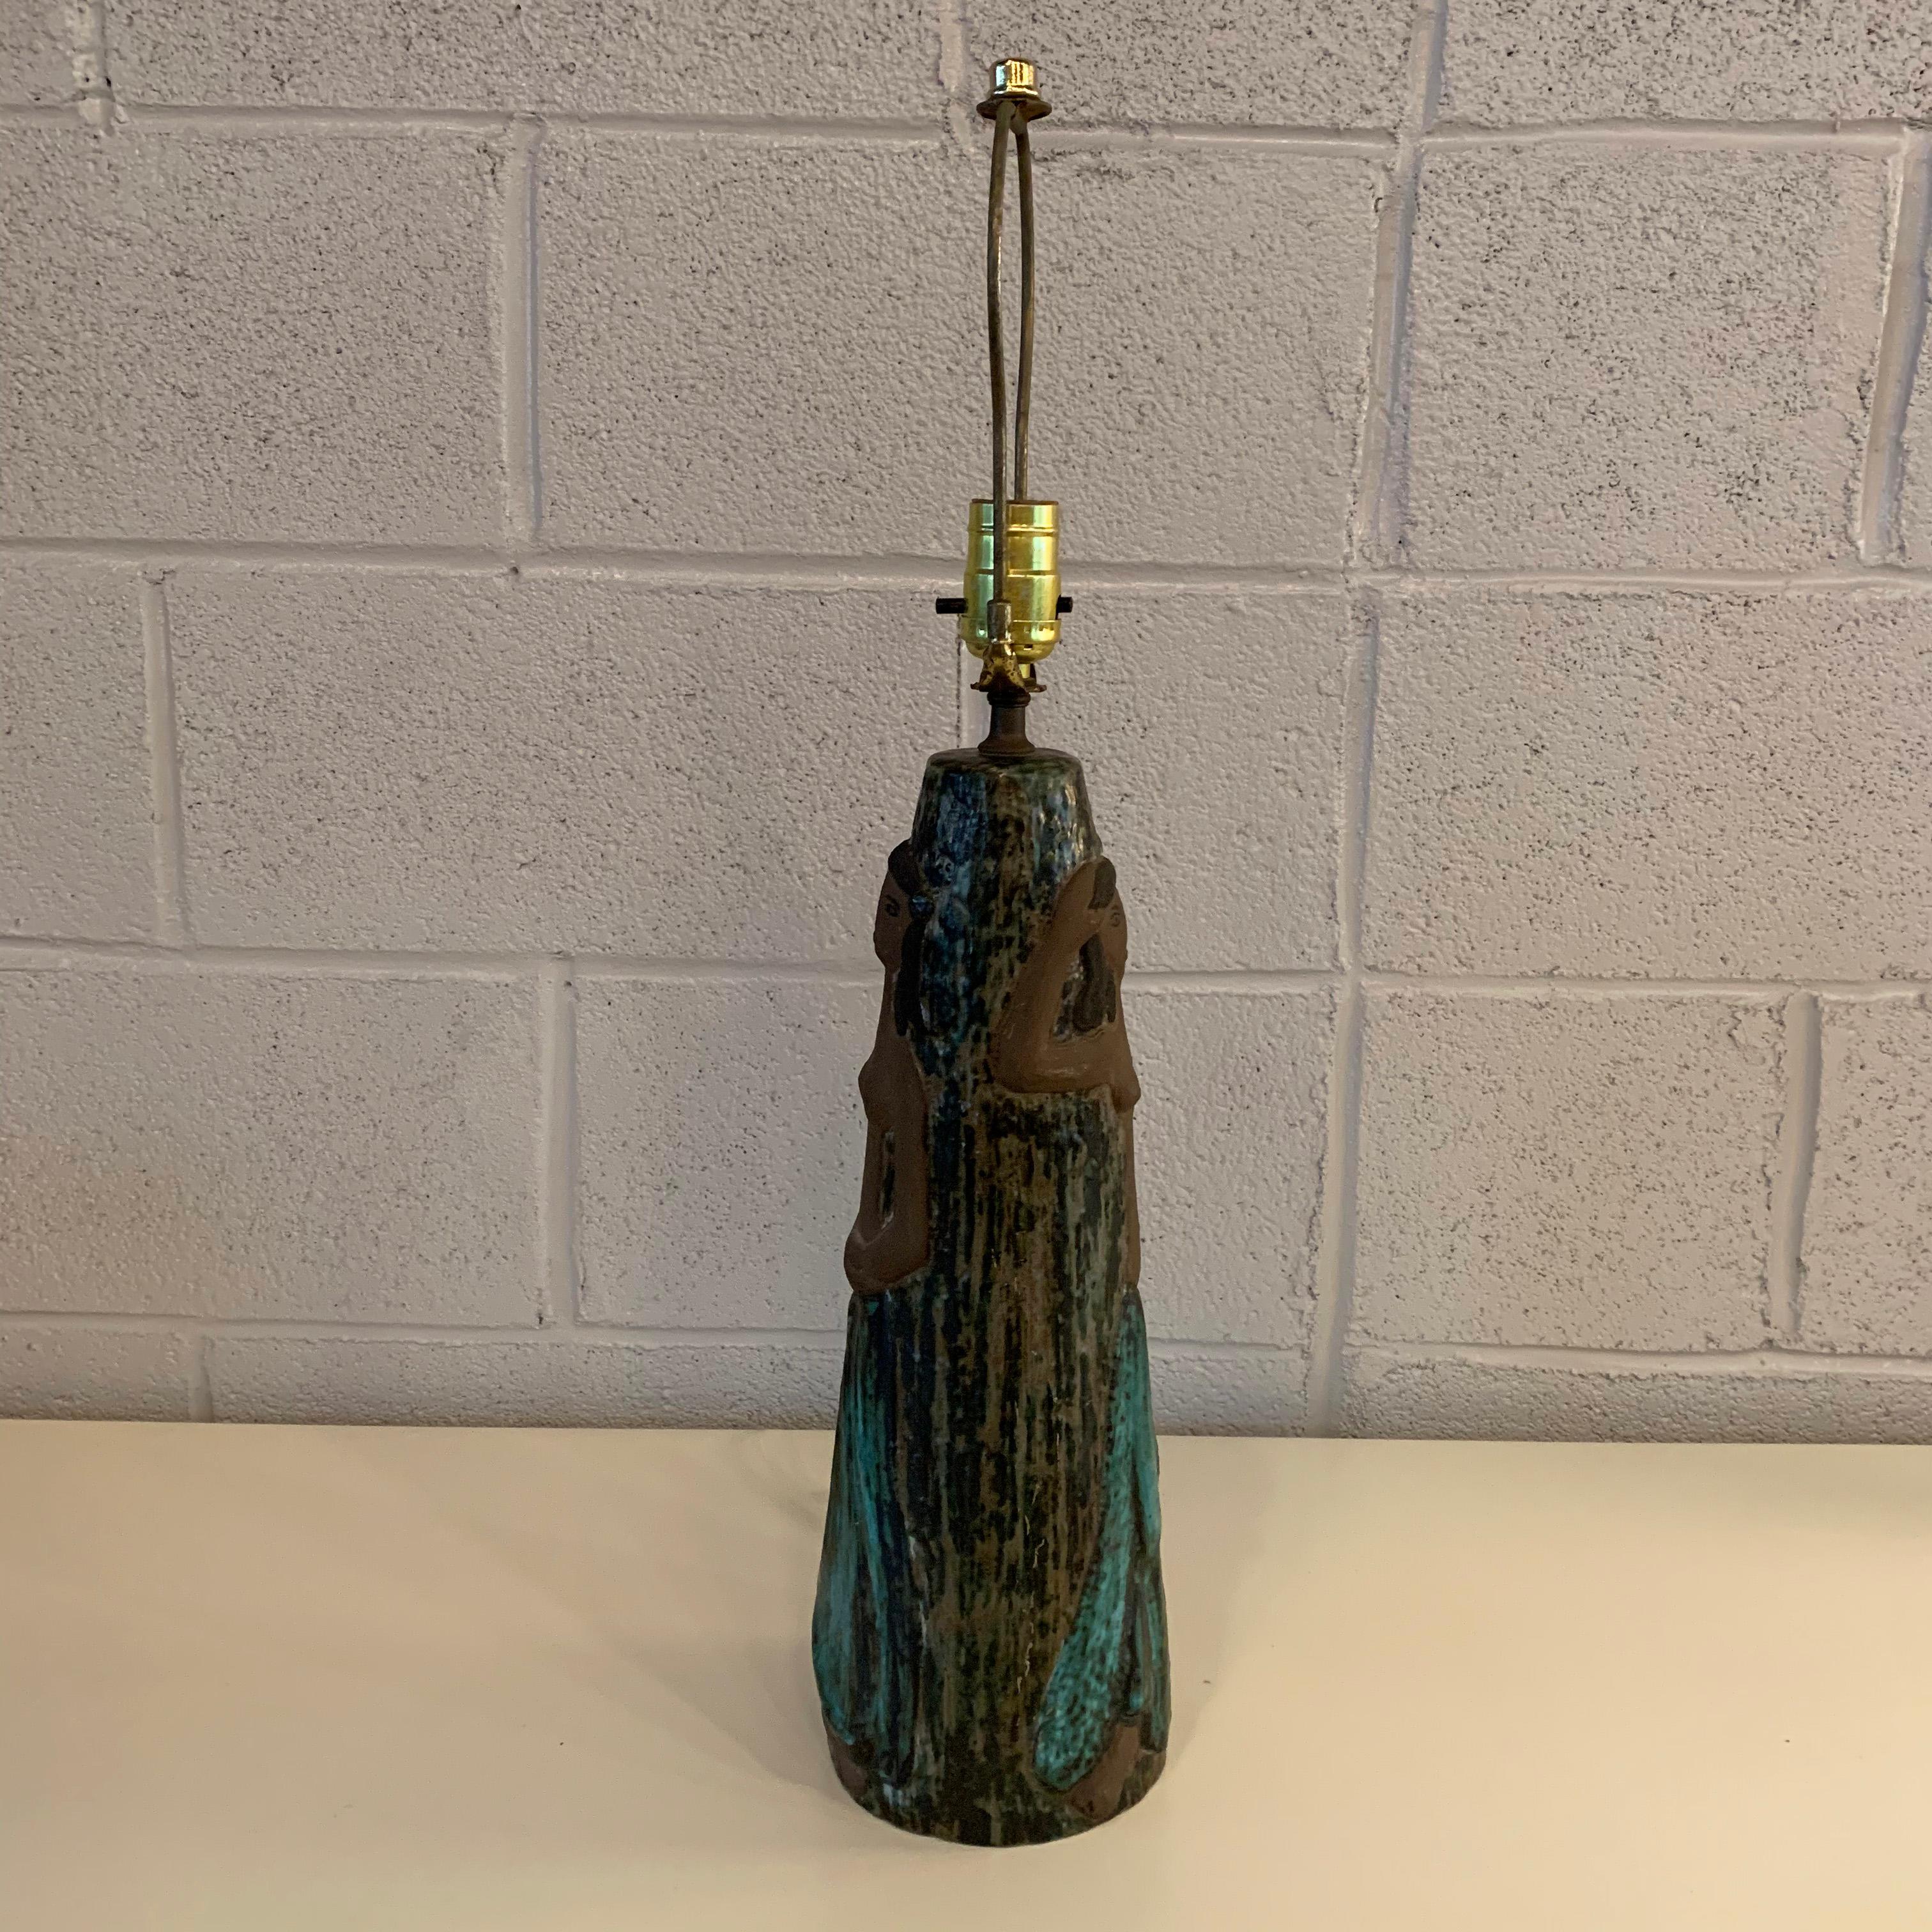 Scandinavian Modern, art pottery table lamp depicting indigenous female figures, marked Ravnild, Denmark. The height of the lamp to the socket is 19 inches.